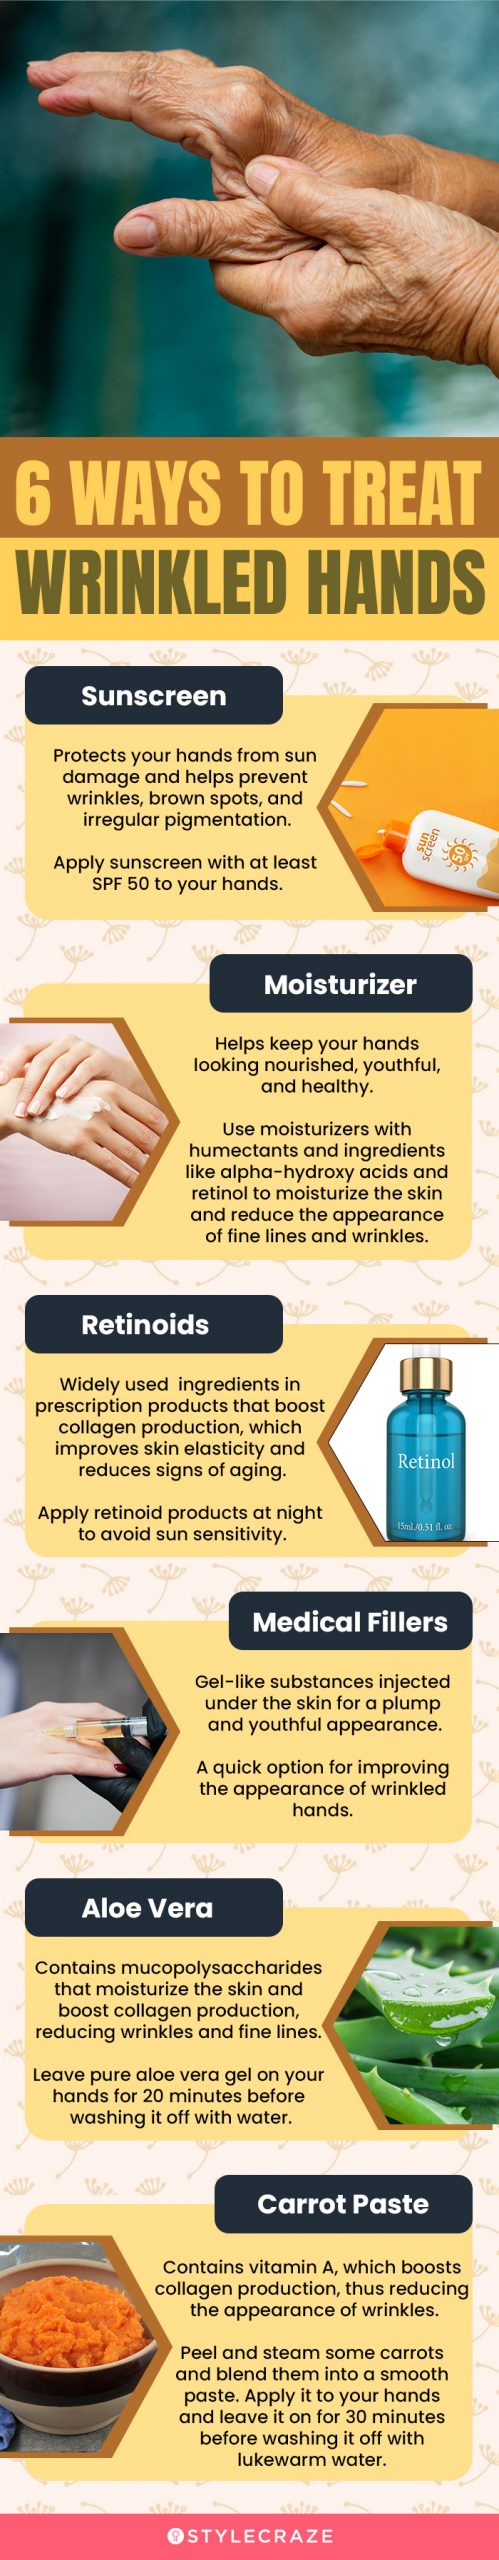 6 ways to treat wrinkled hands (infographic)